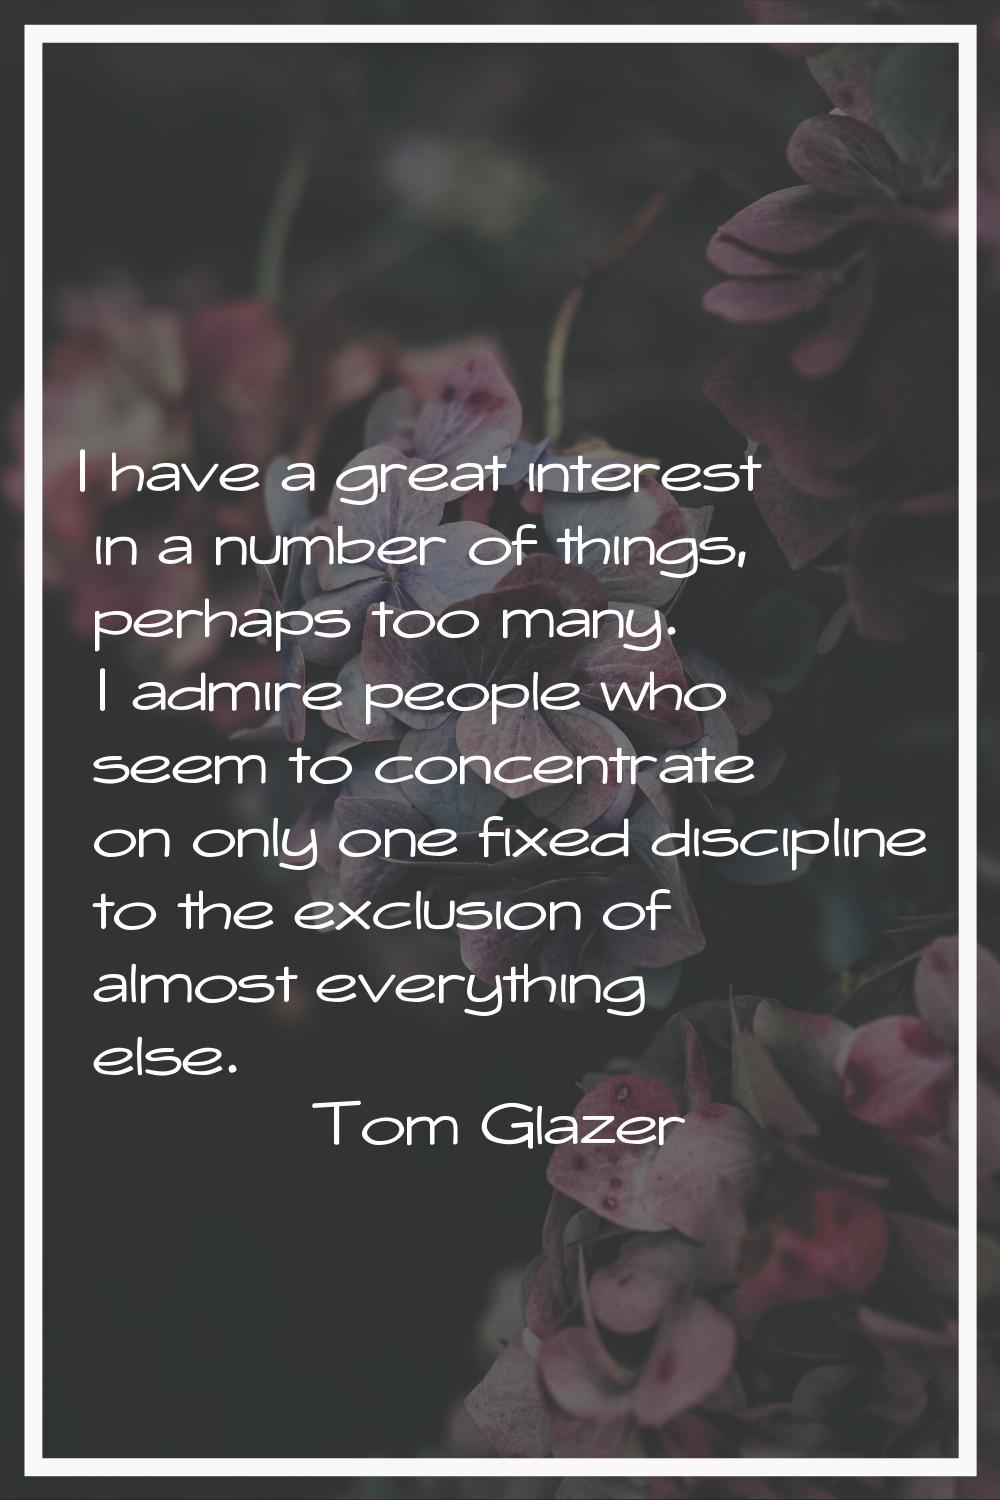 I have a great interest in a number of things, perhaps too many. I admire people who seem to concen